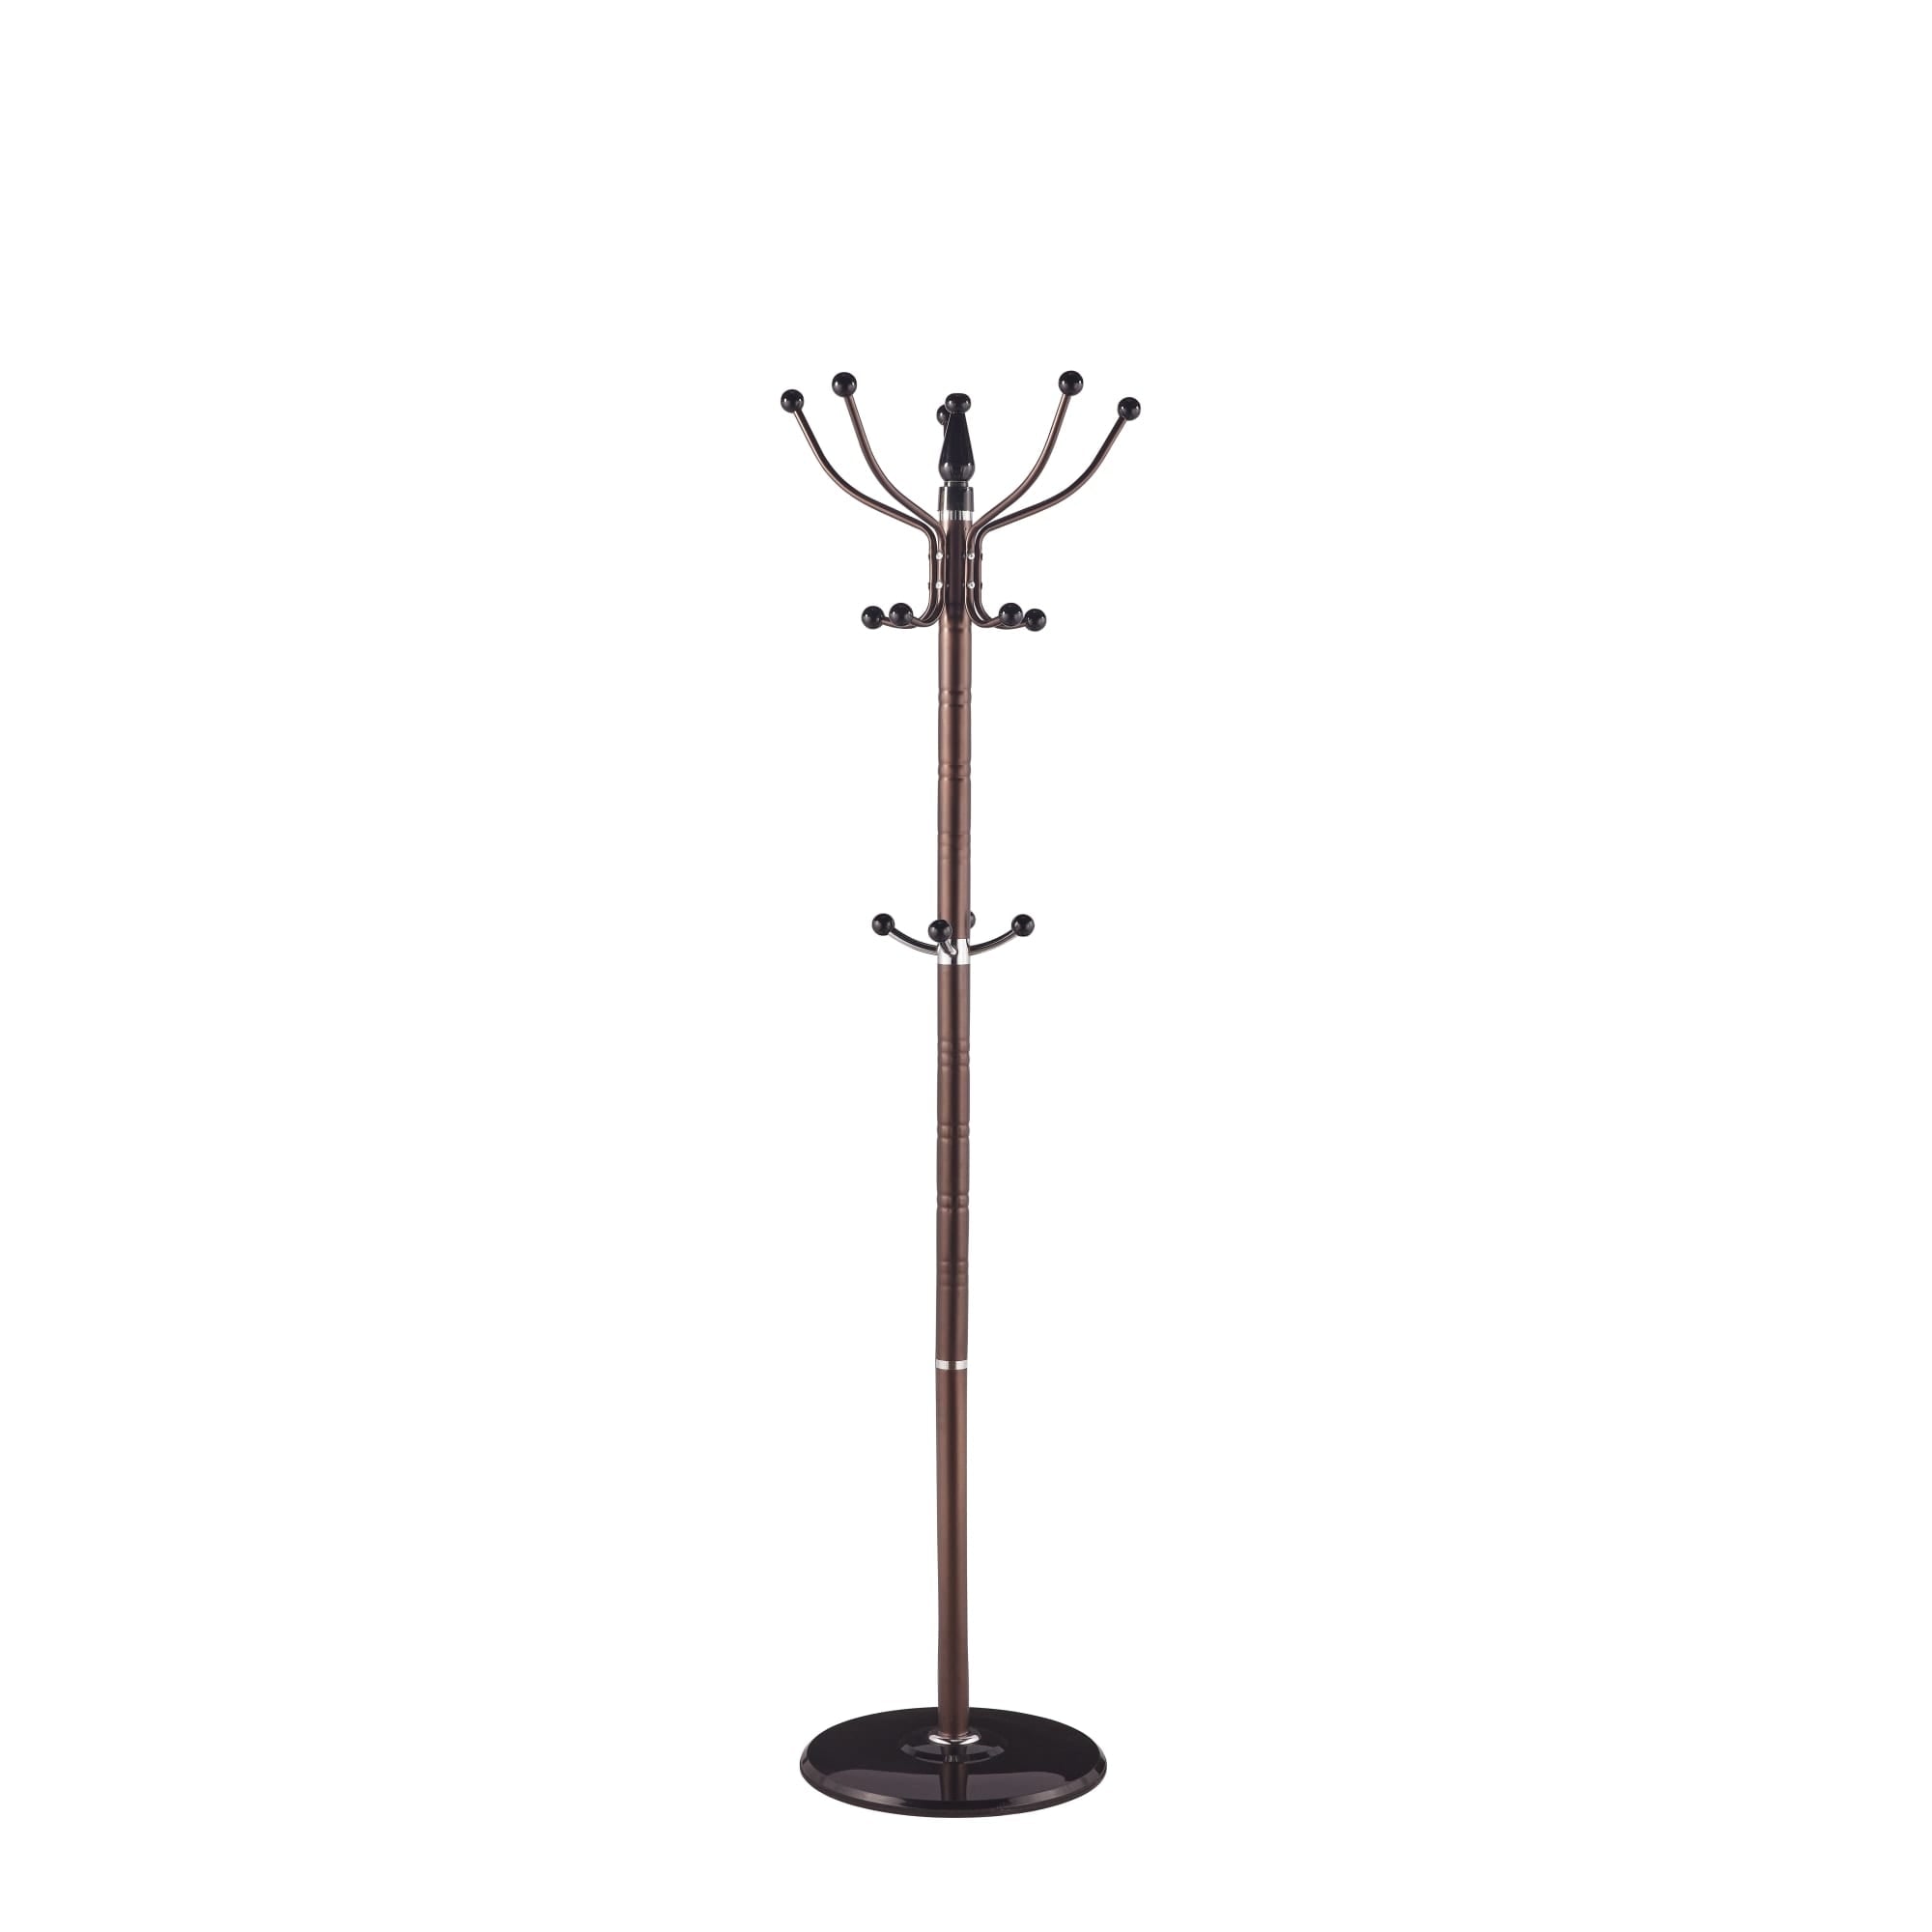 Home Basics 16 Hook Free Standing Coat Rack with Weighted Base, Brown $20.00 EACH, CASE PACK OF 1